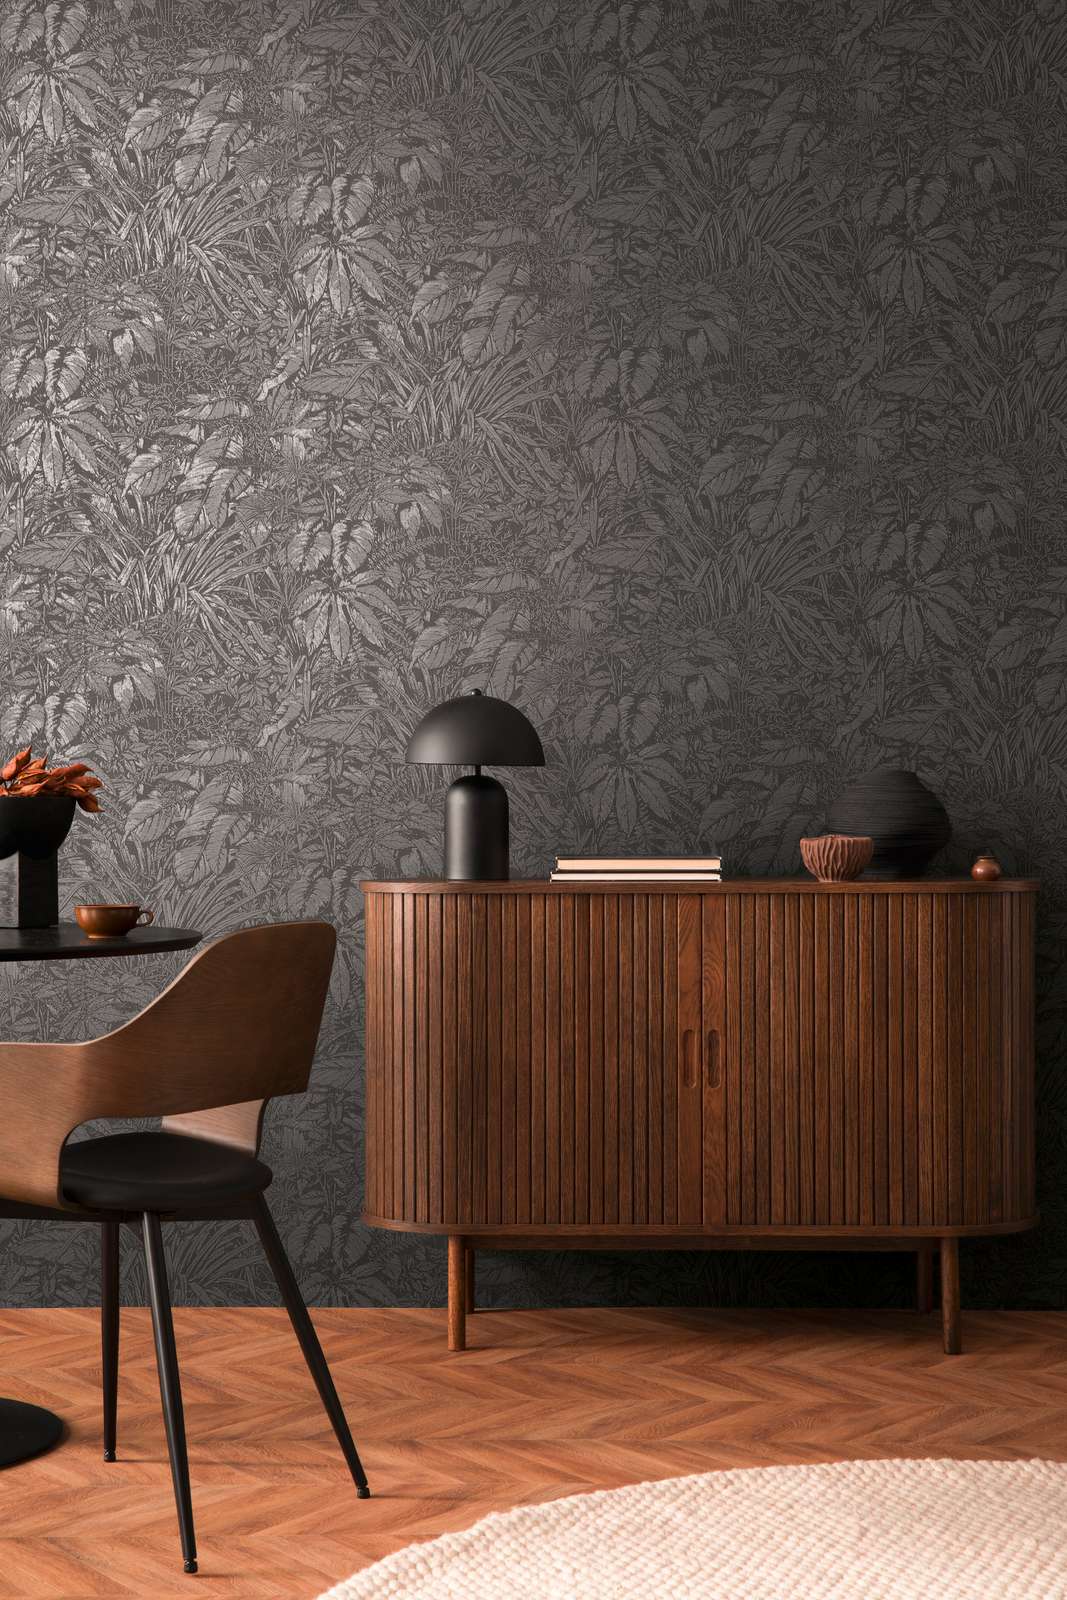             Non-woven wallpaper with floral leaf pattern - grey, black, silver
        